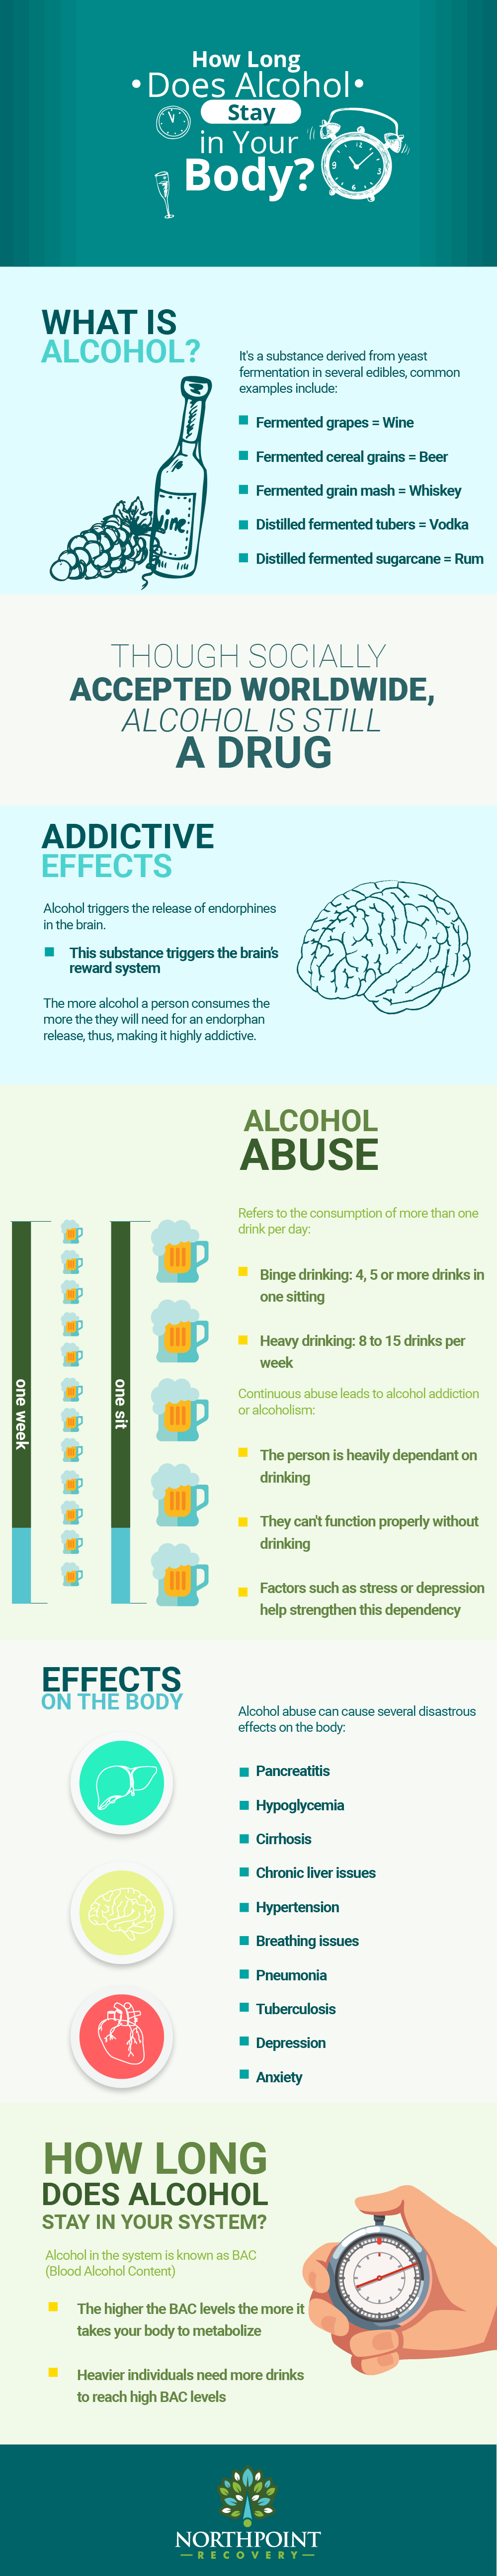 How Long Does Alcohol Stay in Your Body